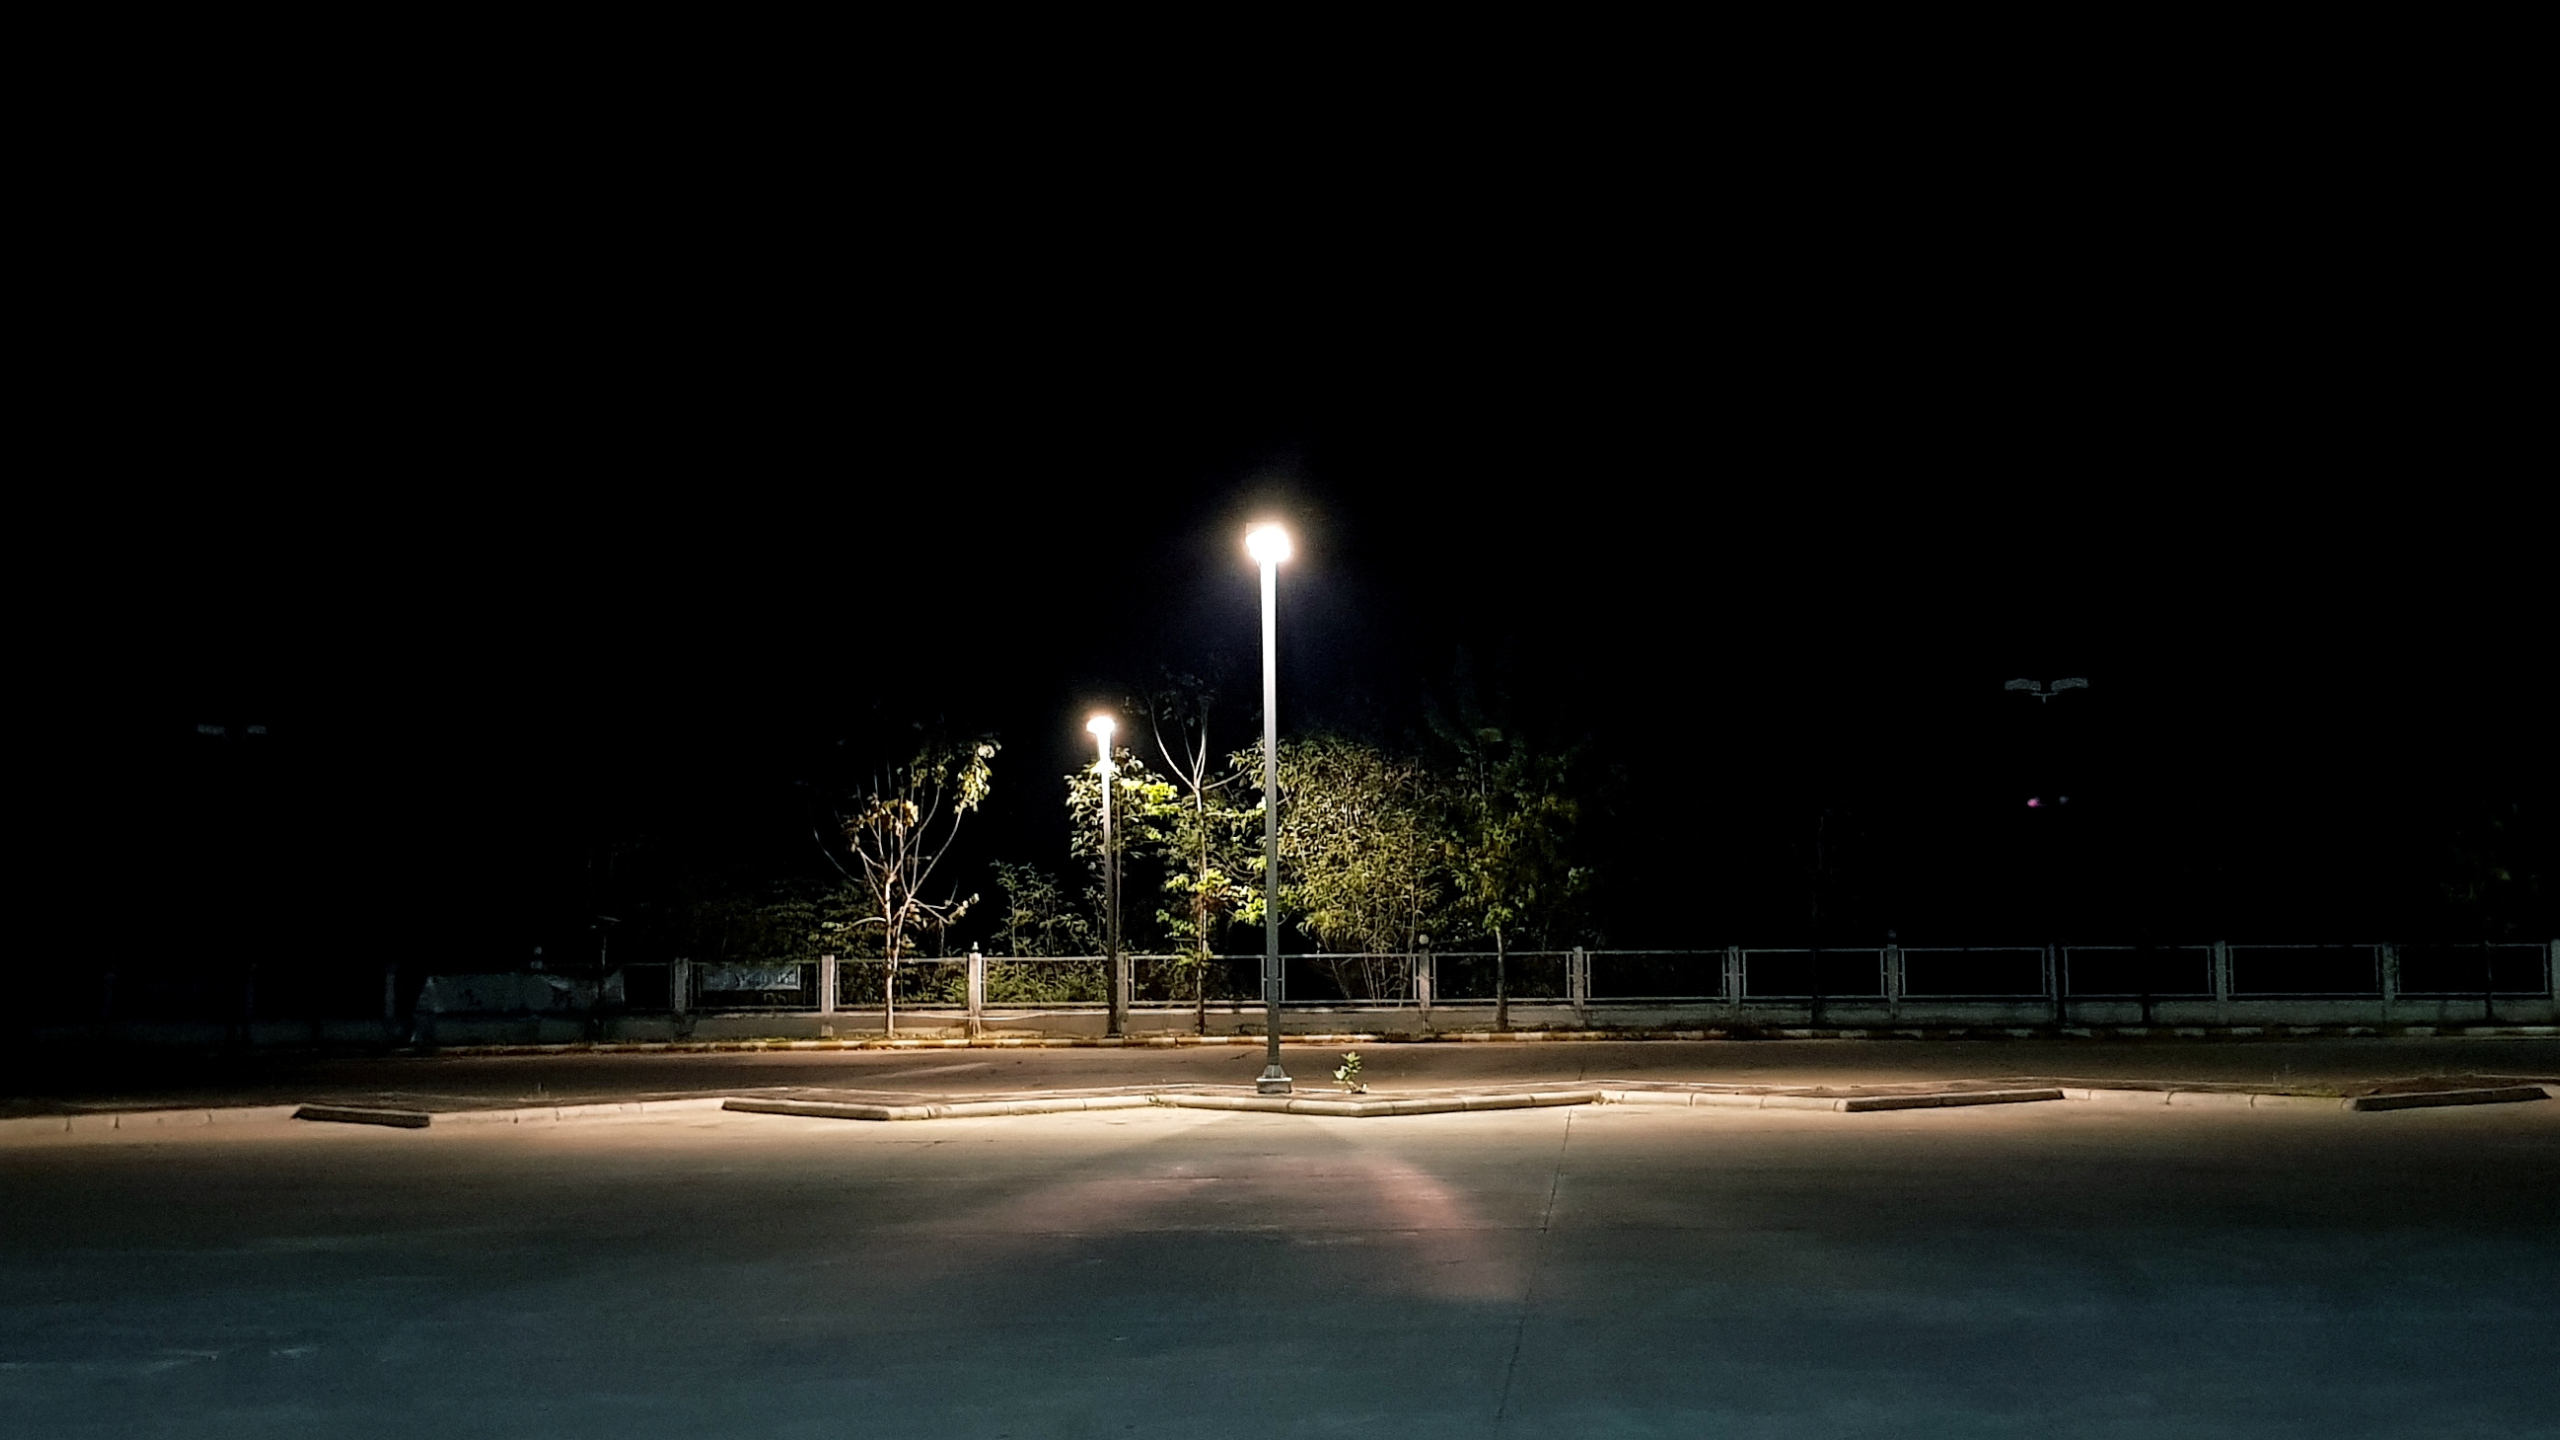 parking lot at night with street light